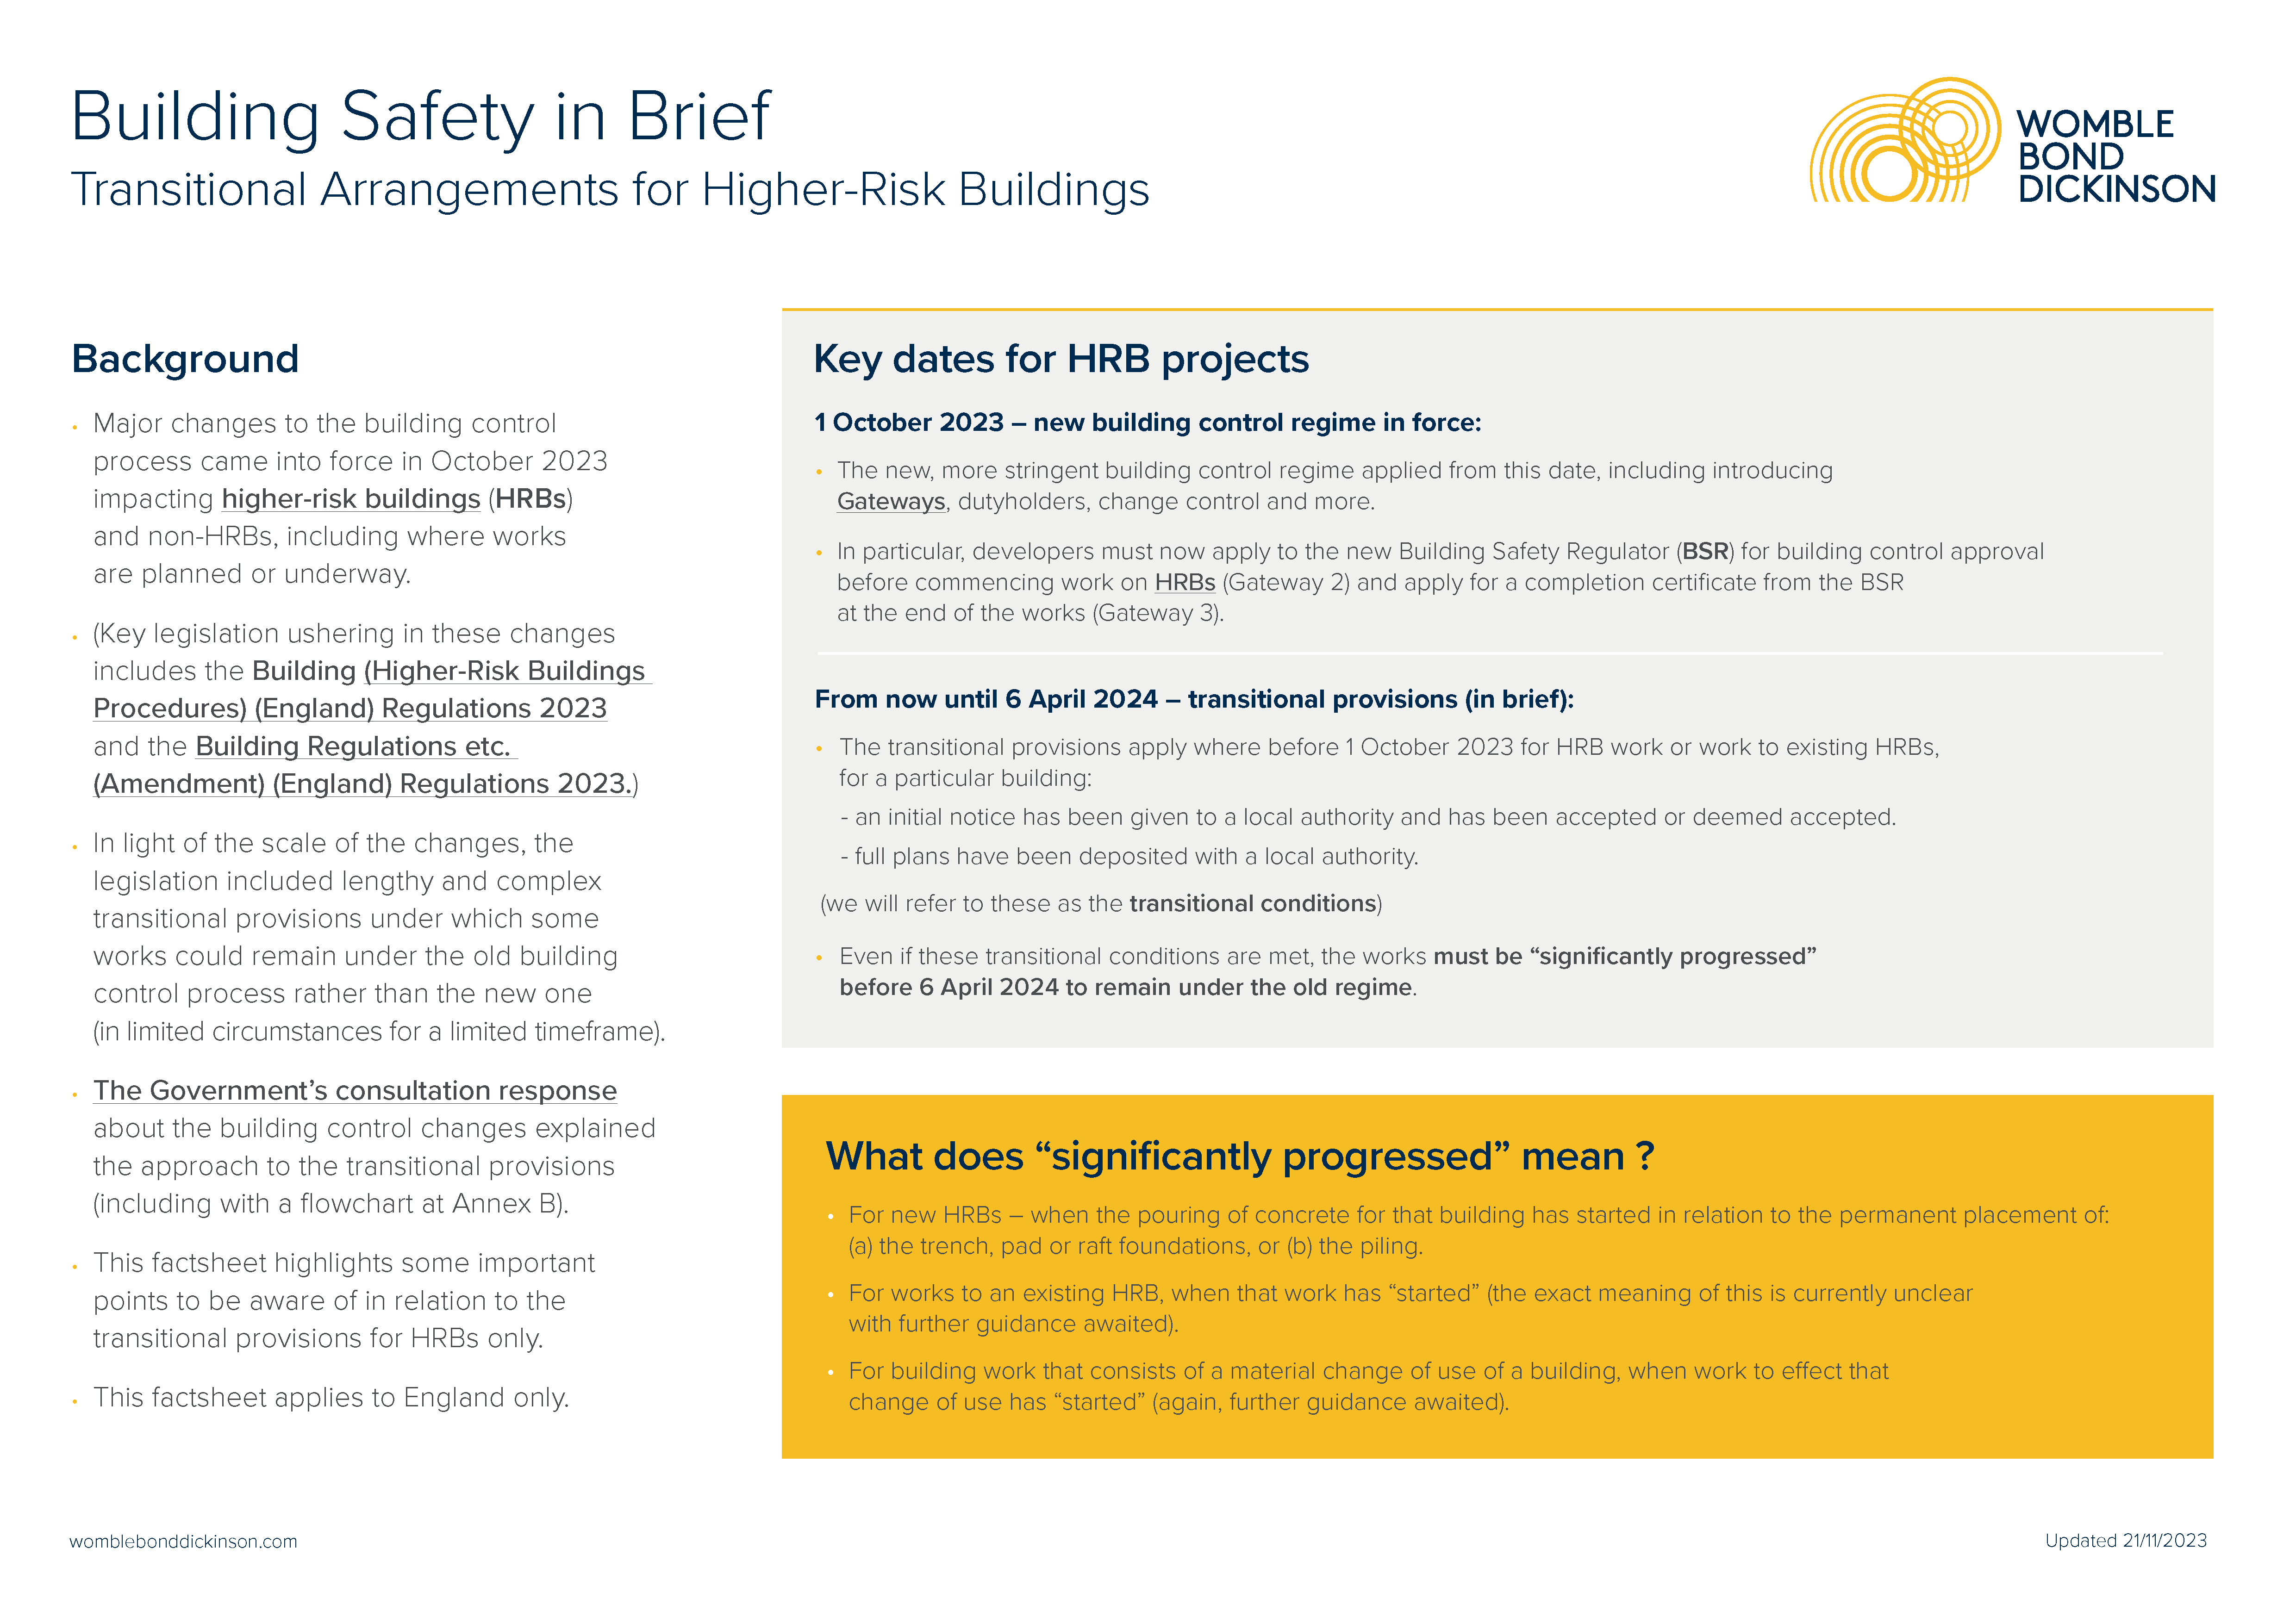 Building safety in brief: Transitional agreements for HRBs